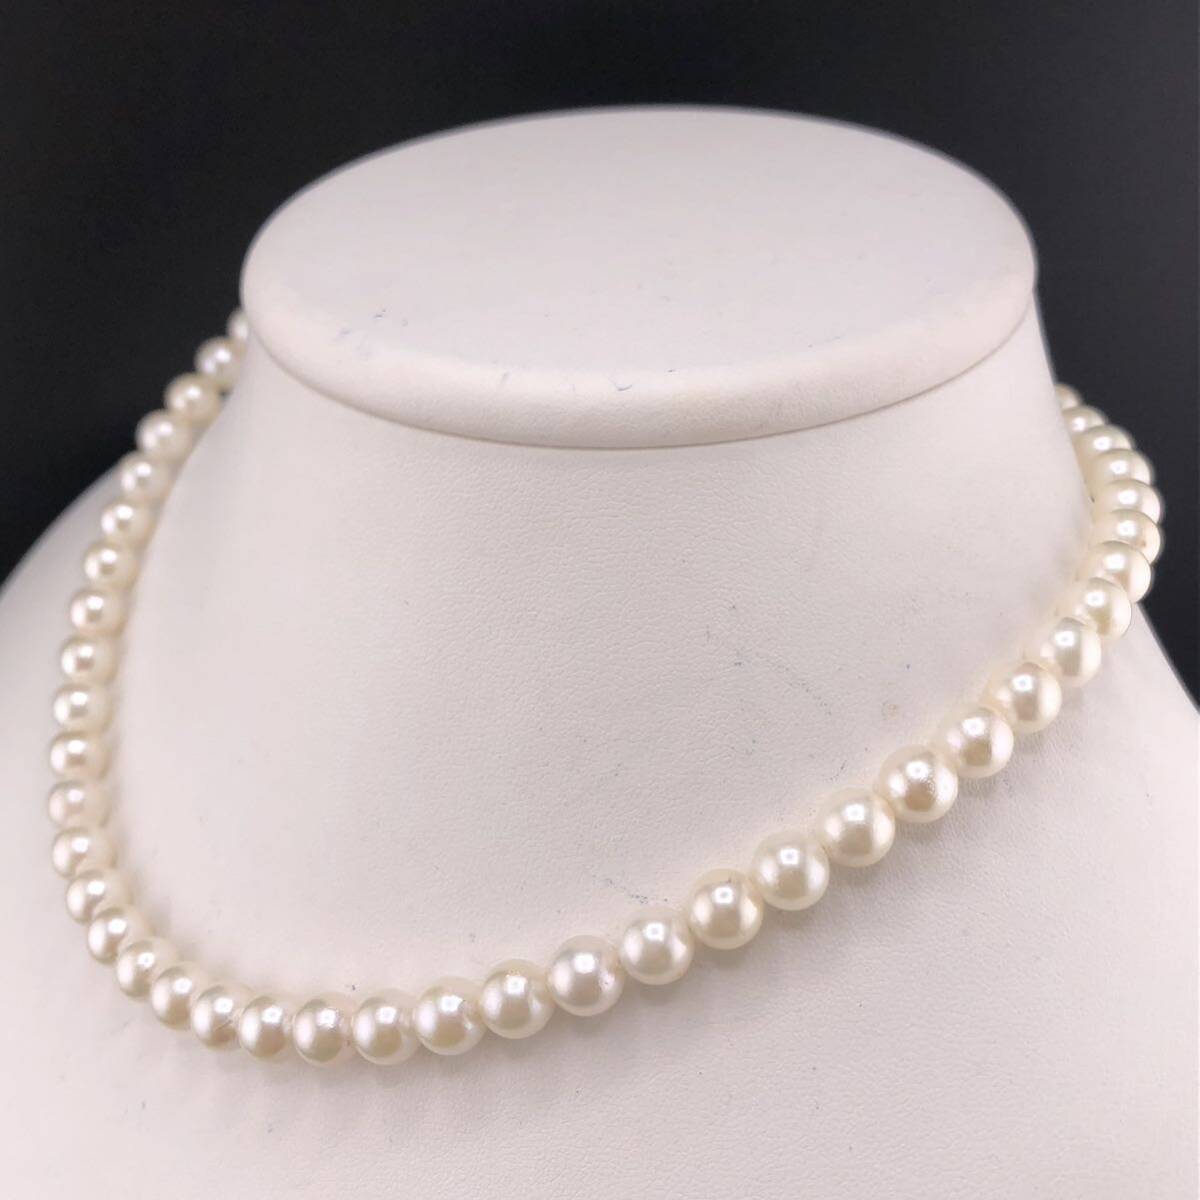 E04-4036☆ アコヤパールネックレス 7.0mm 39cm 32.2g ( アコヤ真珠 Pearl necklace SILVER )_画像2